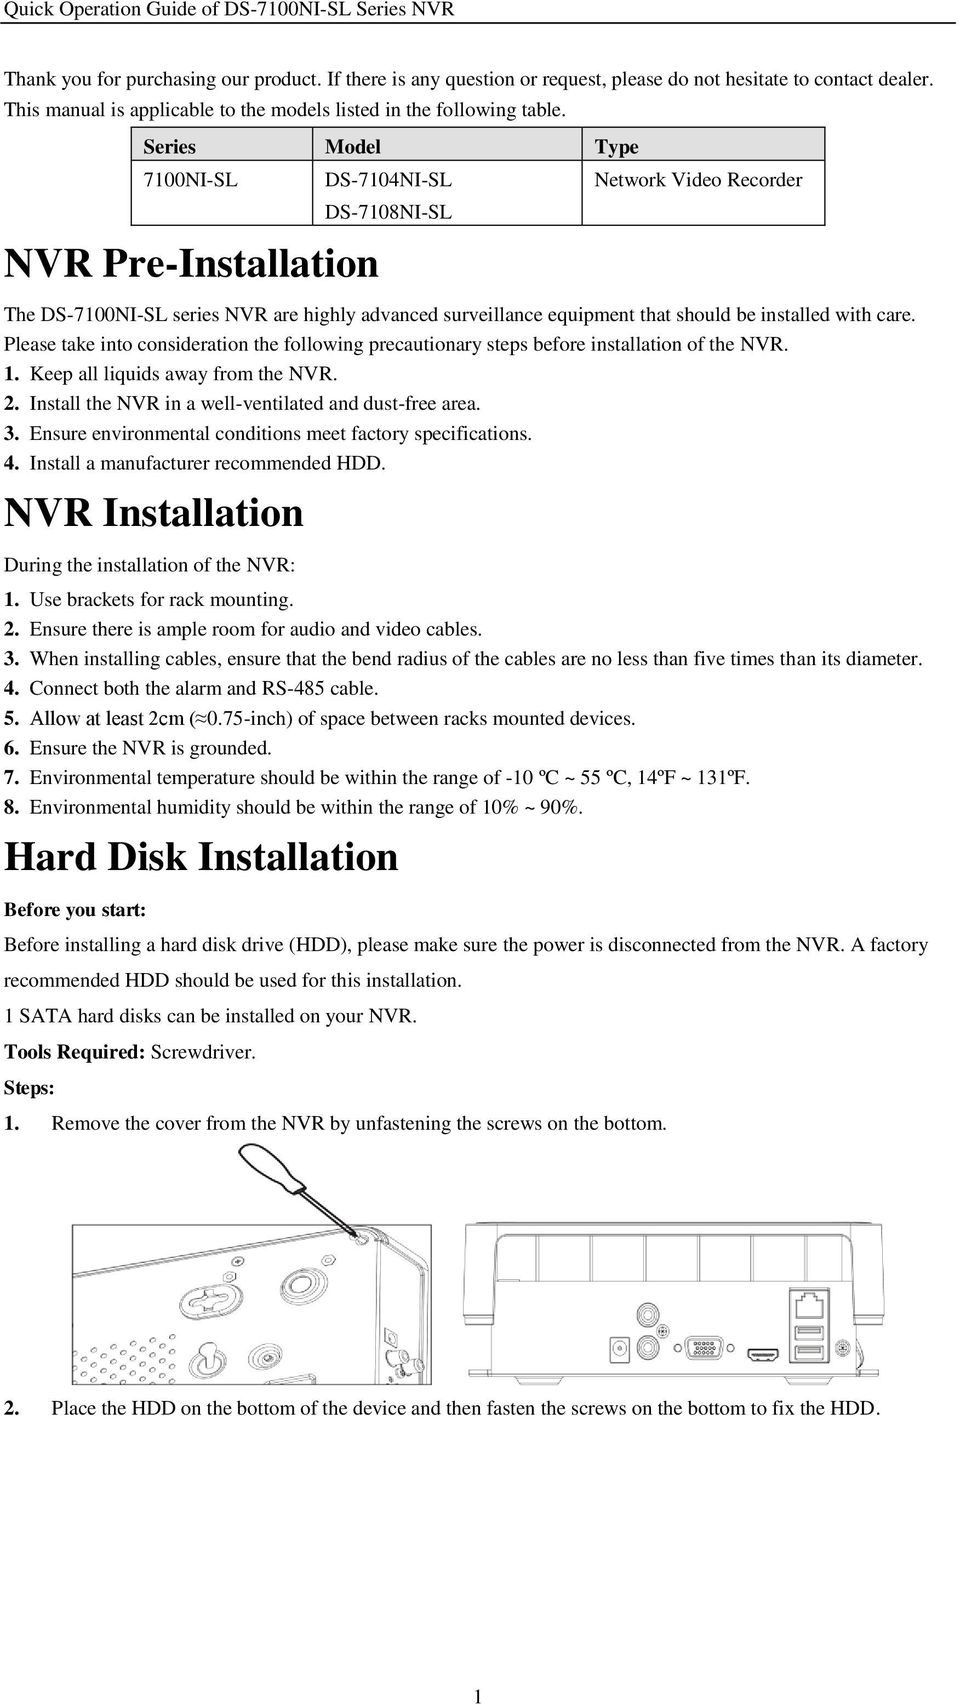 care. Please take into consideration the following precautionary steps before installation of the NVR. 1. Keep all liquids away from the NVR. 2.